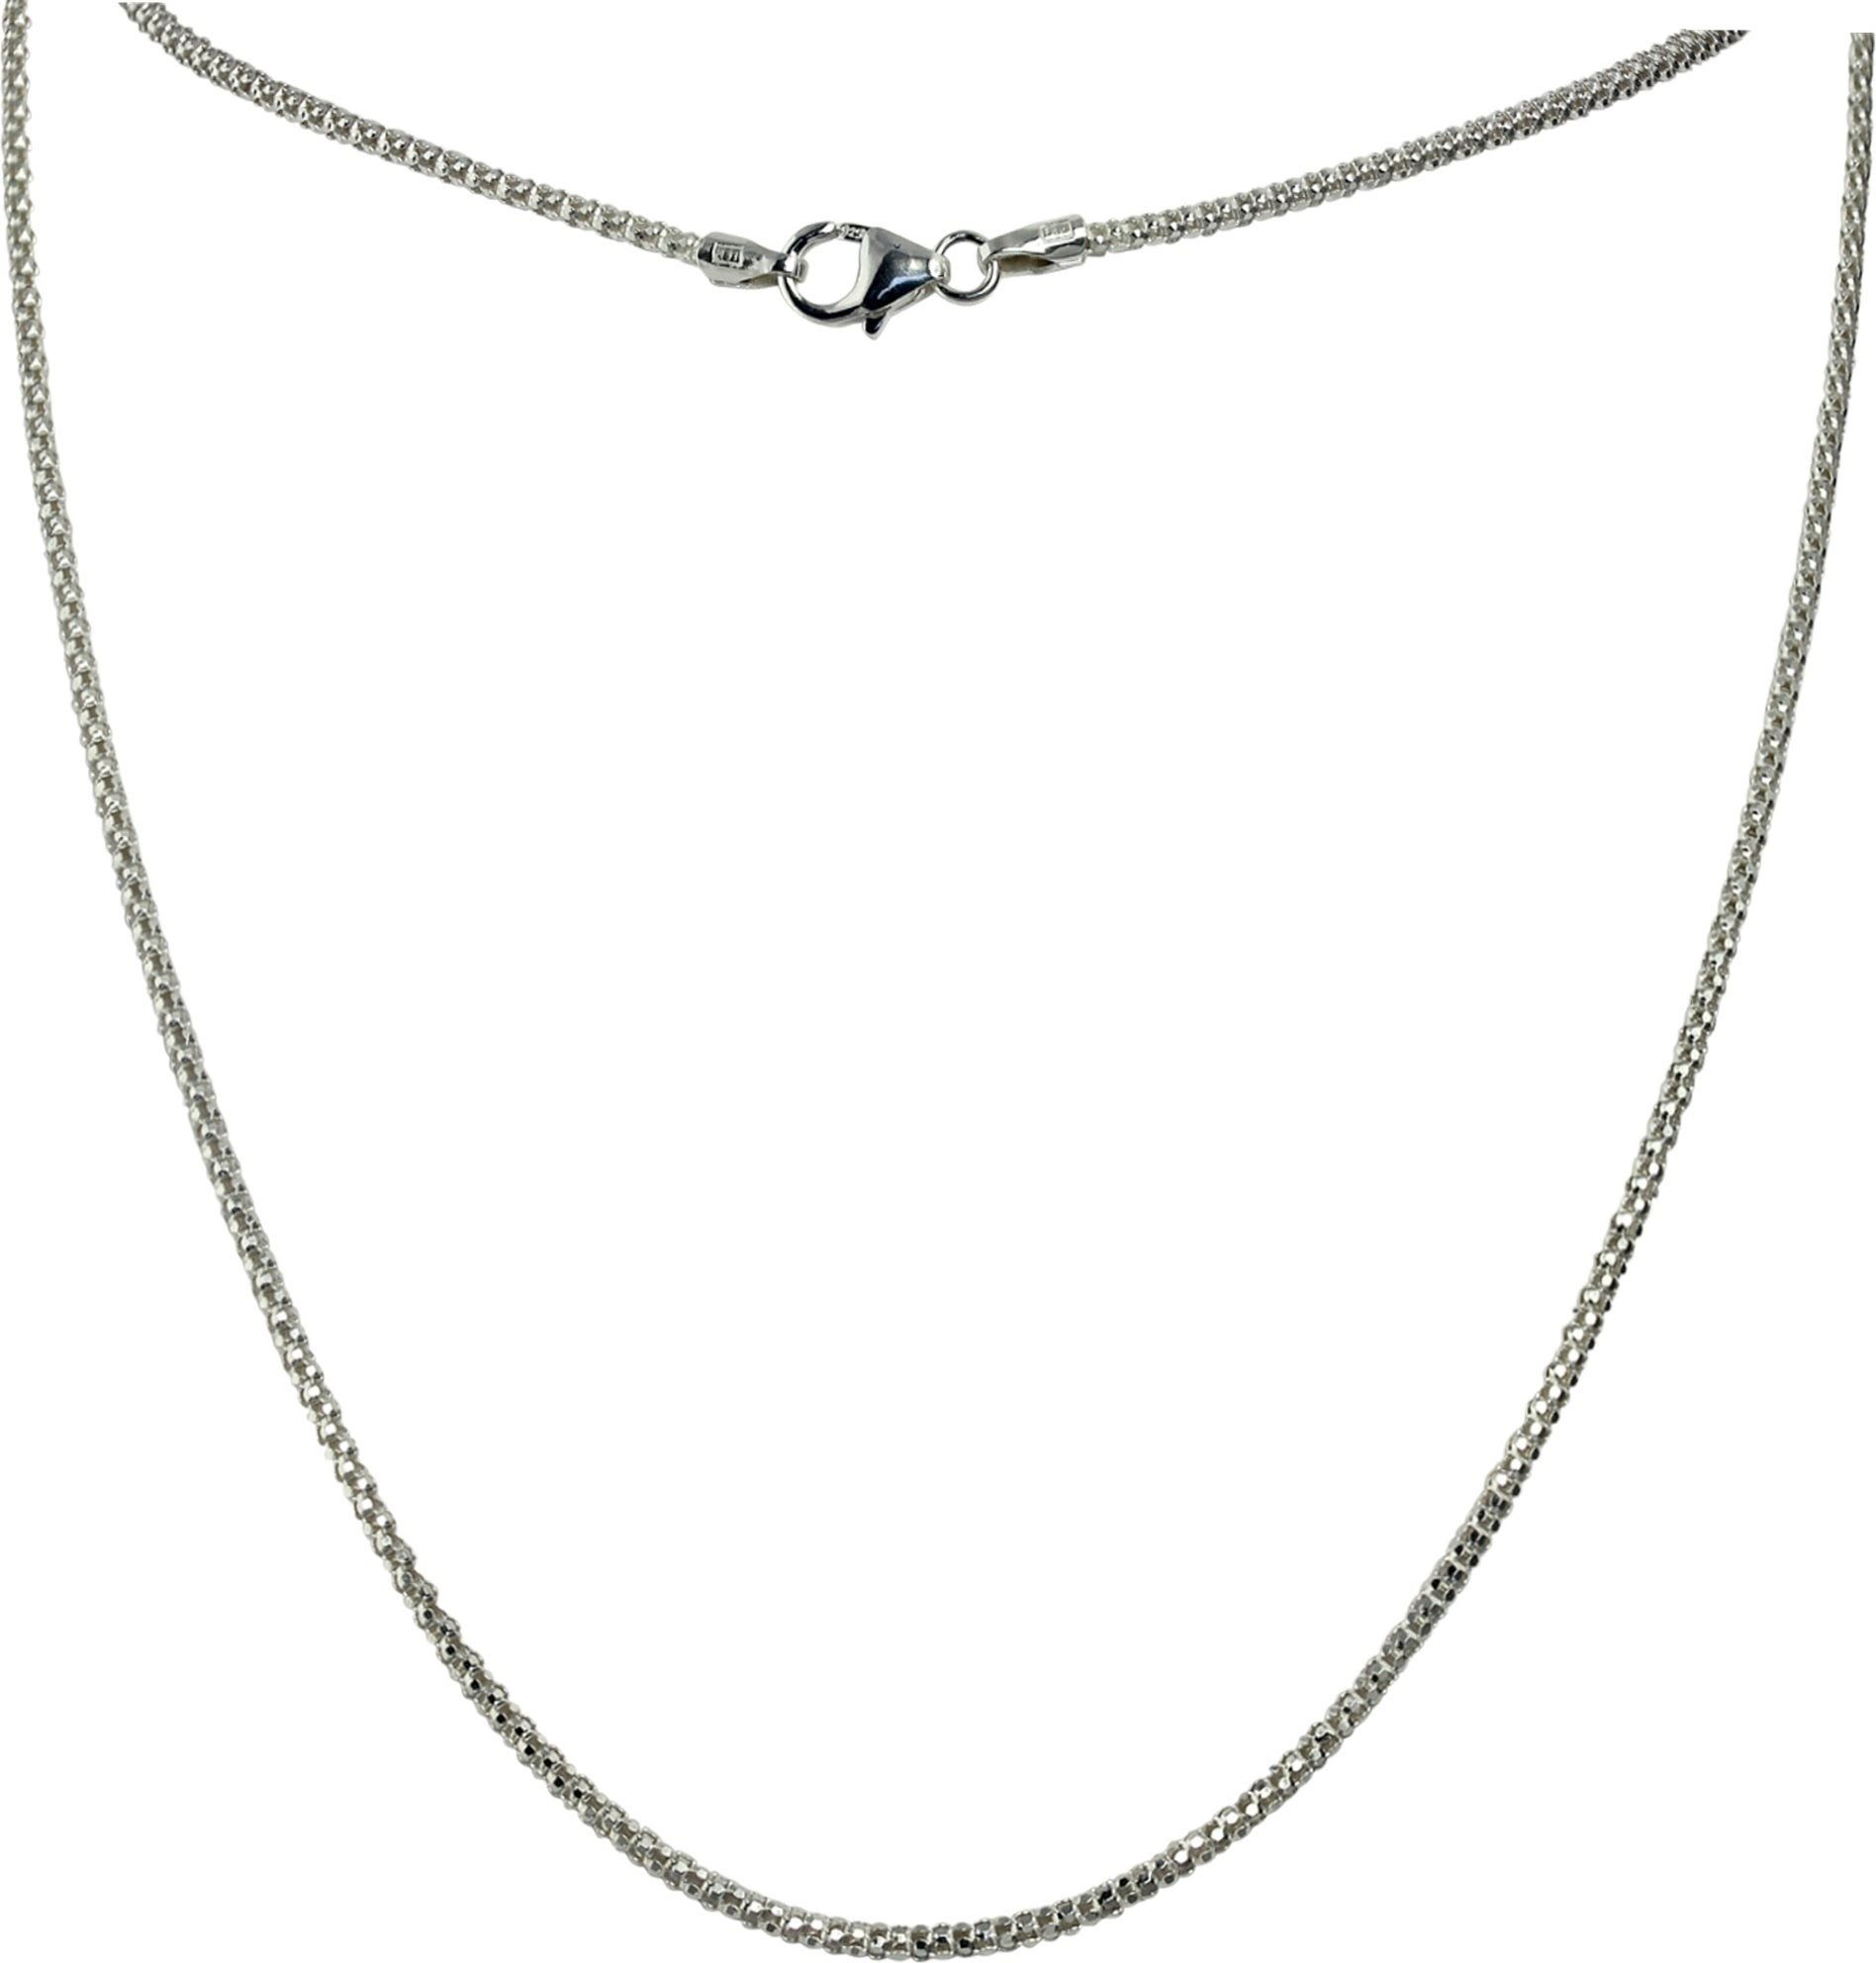 SilberDream Collier Germany Farbe: Silber, Schmuck 925 SilberDream 45cm, silber 45cm, silber, Collier Colliers Sterling Made-In ca.